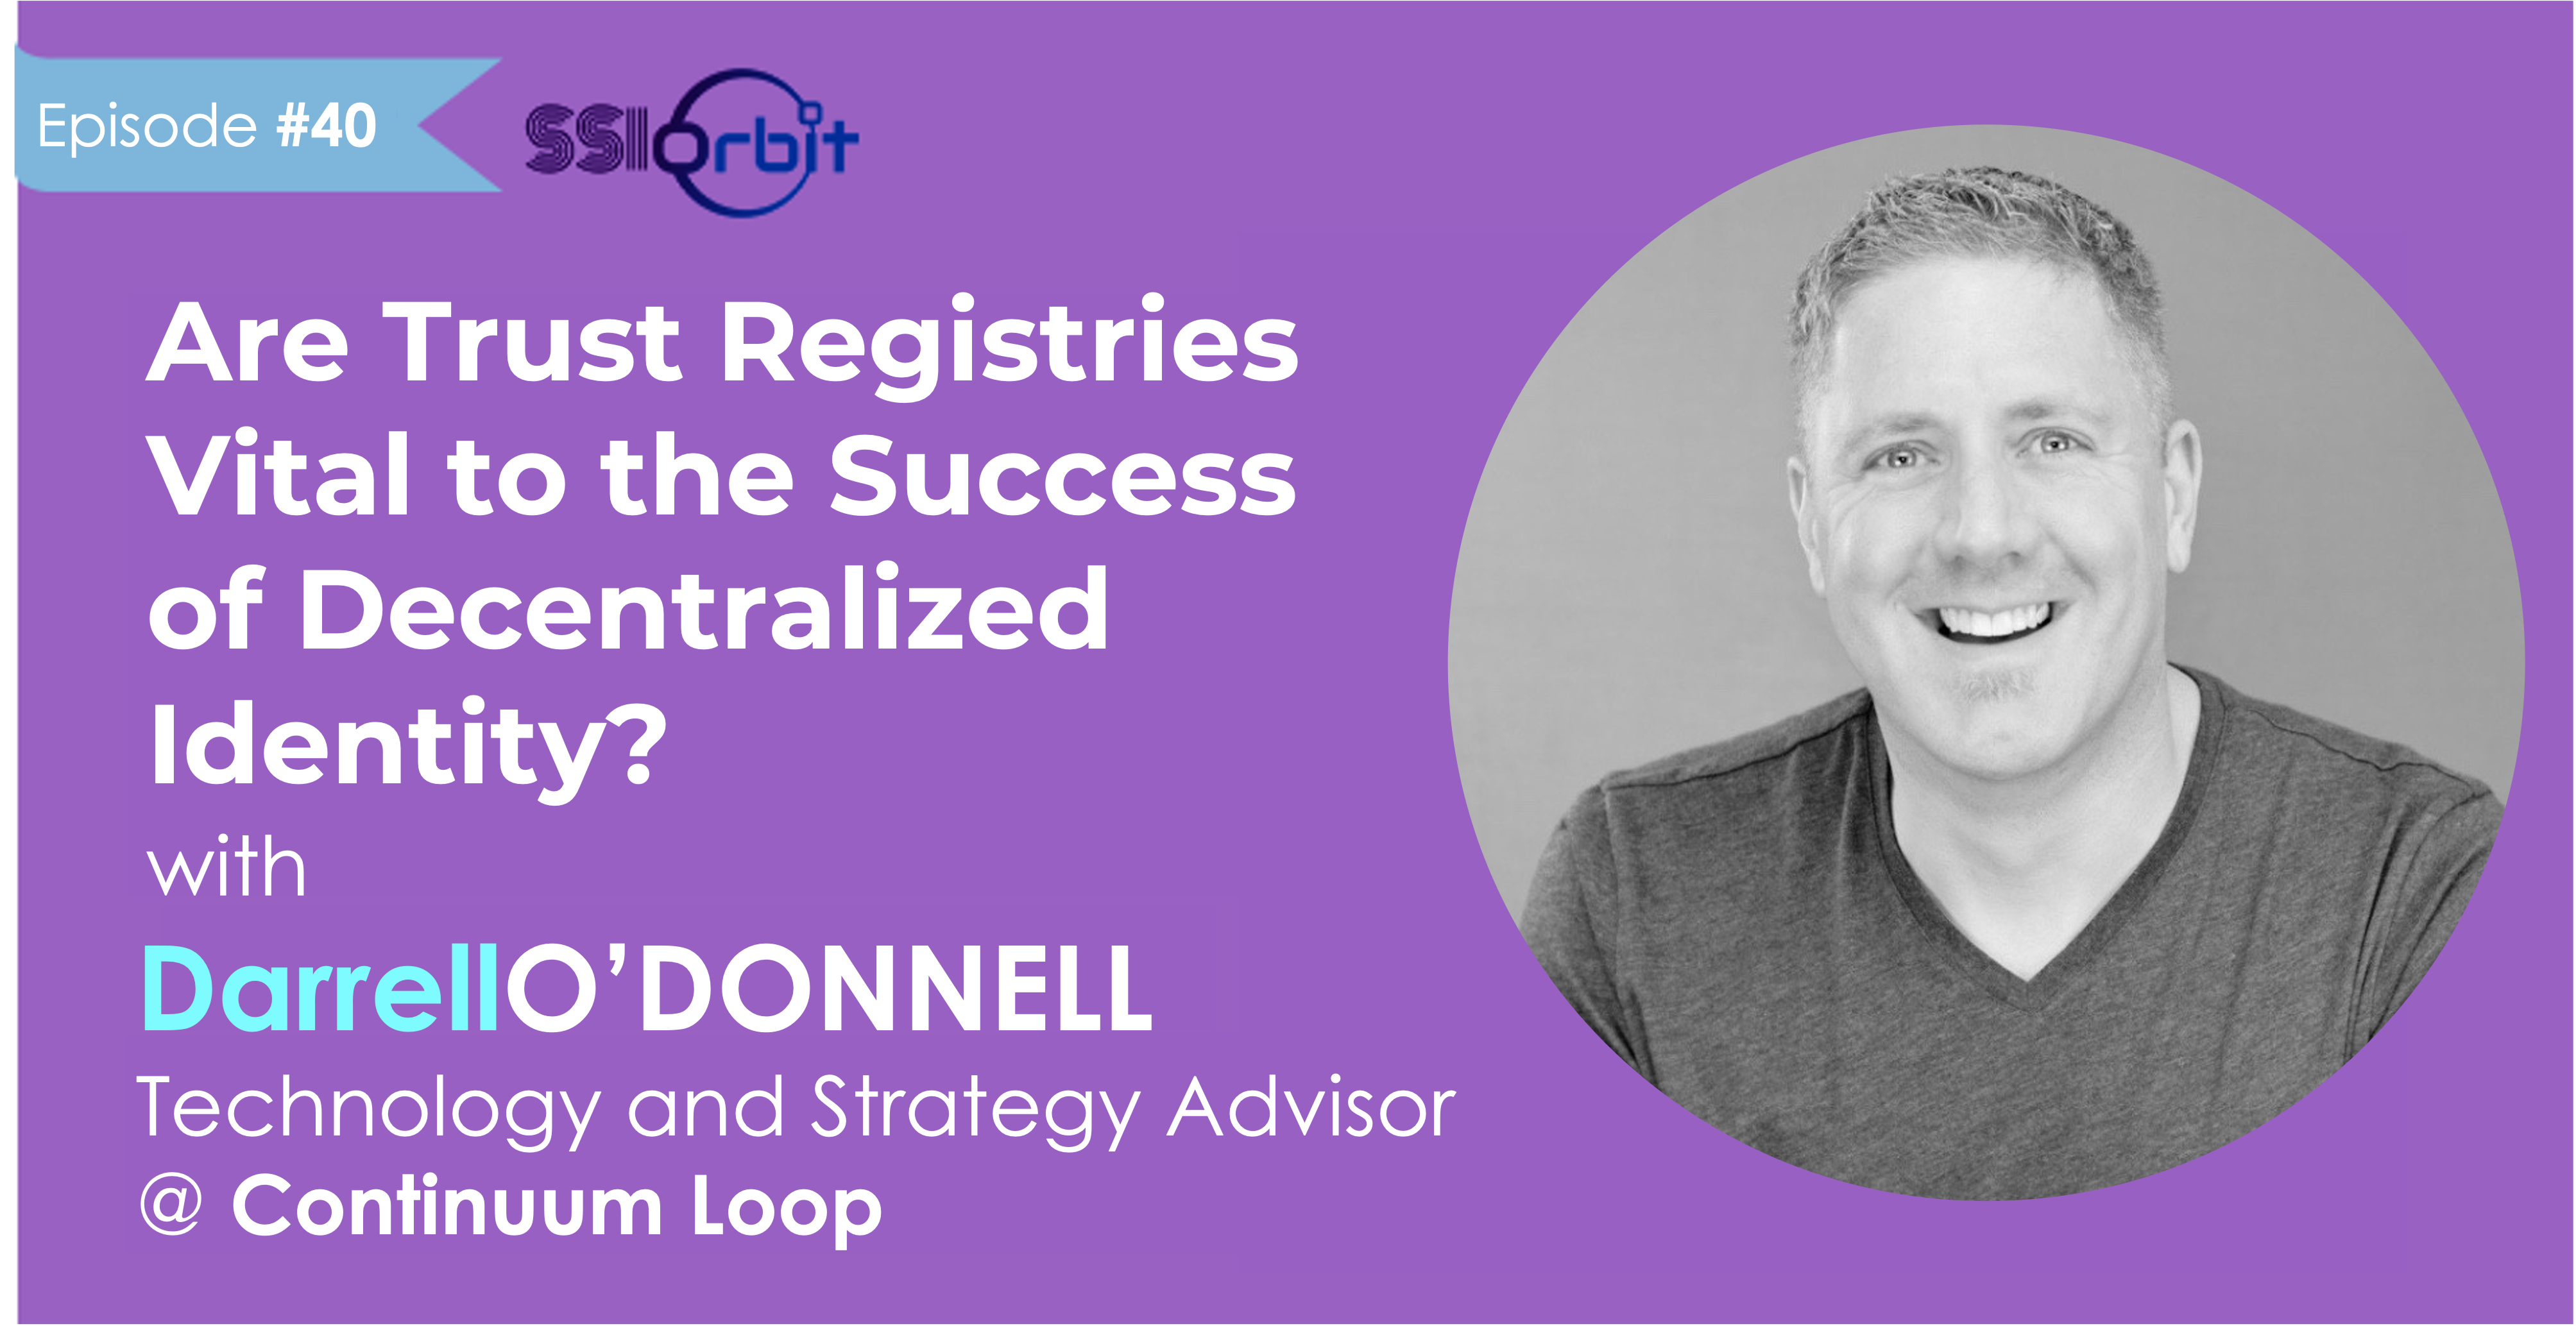 Are Trust Registries Vital to the Success of Decentralized Identity? (with Darrell O’Donnell)